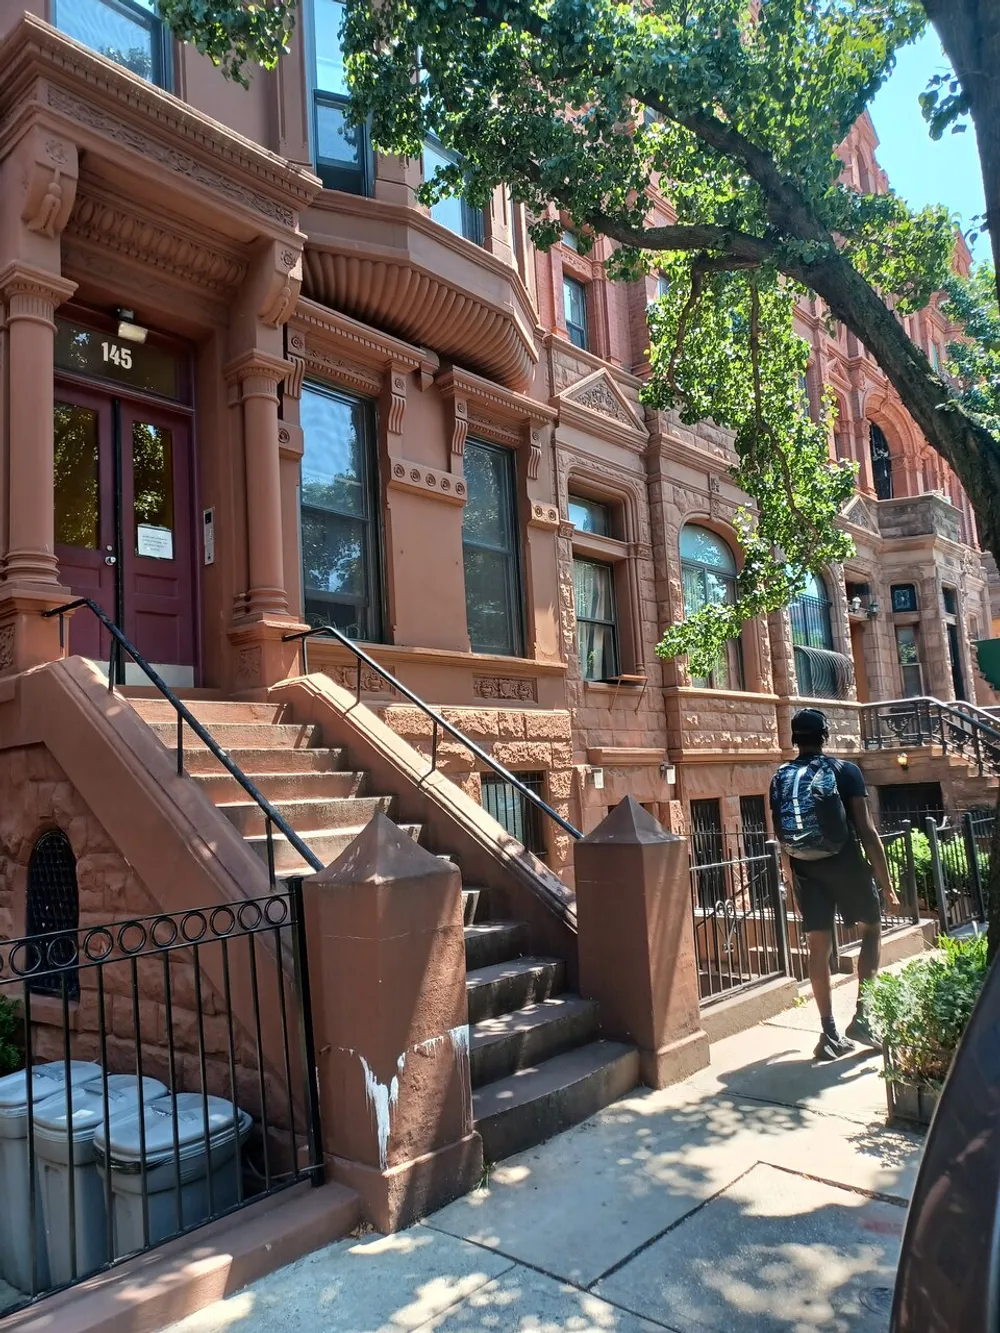 A person walks past the entrance to a brownstone building with ornate detailing and a stoop in a tree-lined urban street